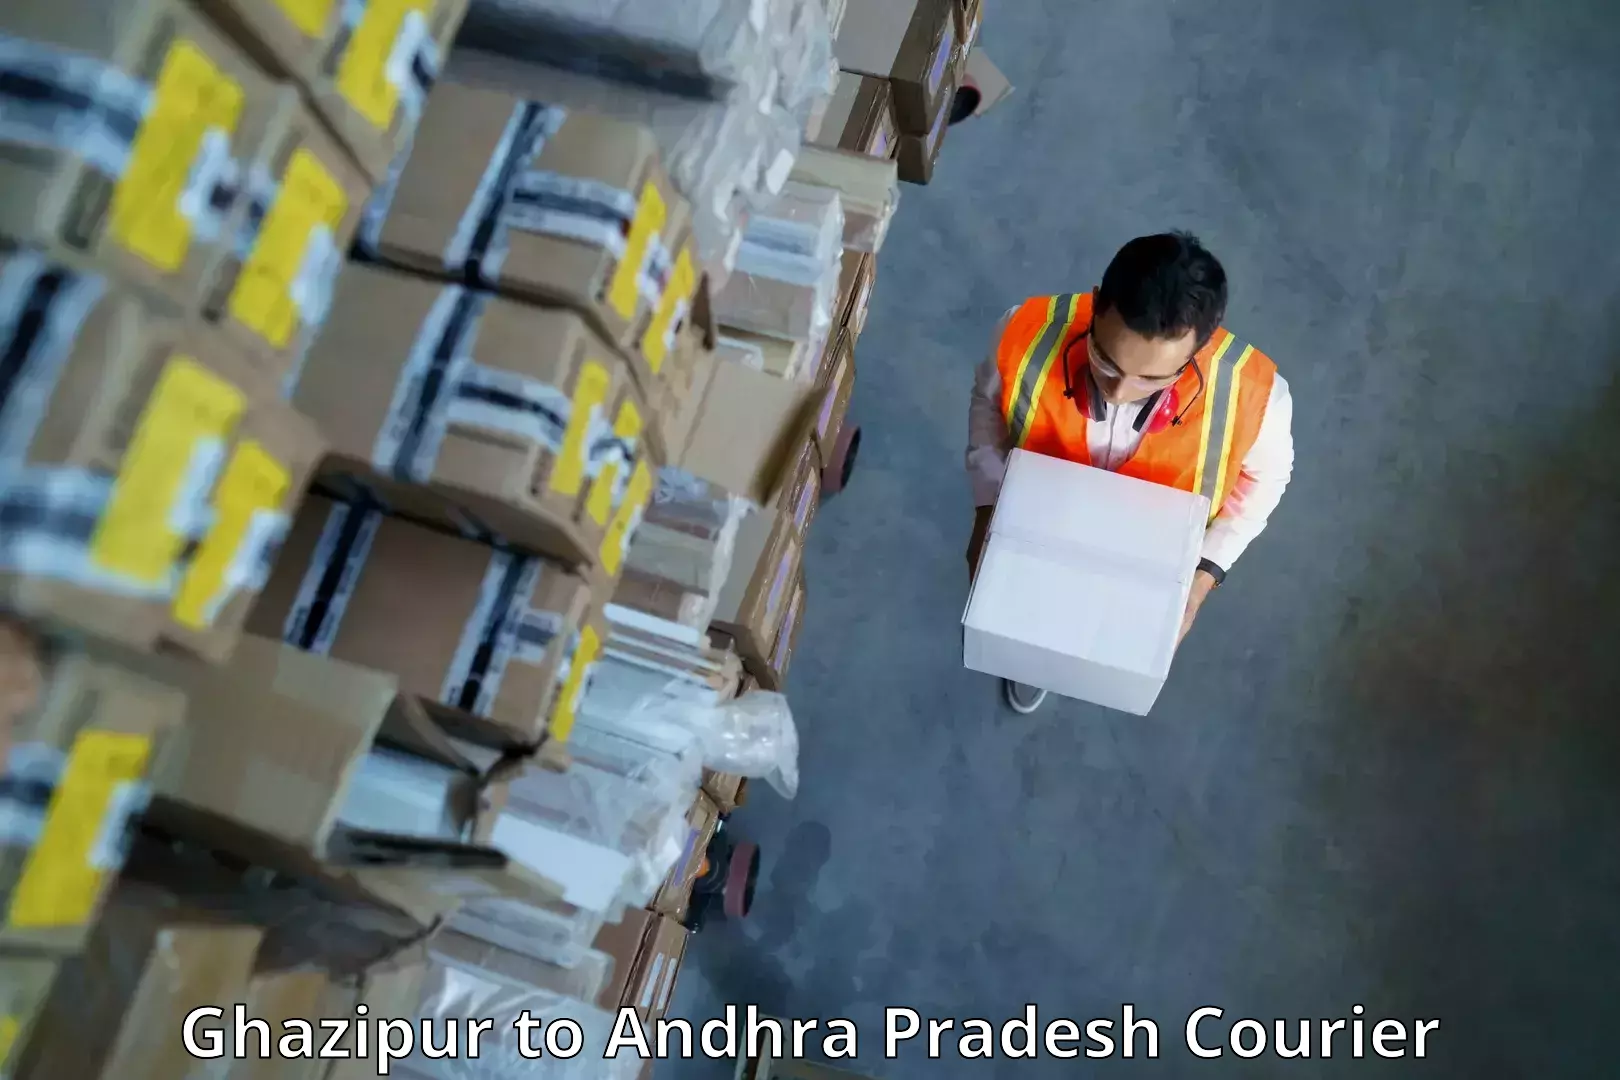 High-speed logistics services Ghazipur to Challapalli